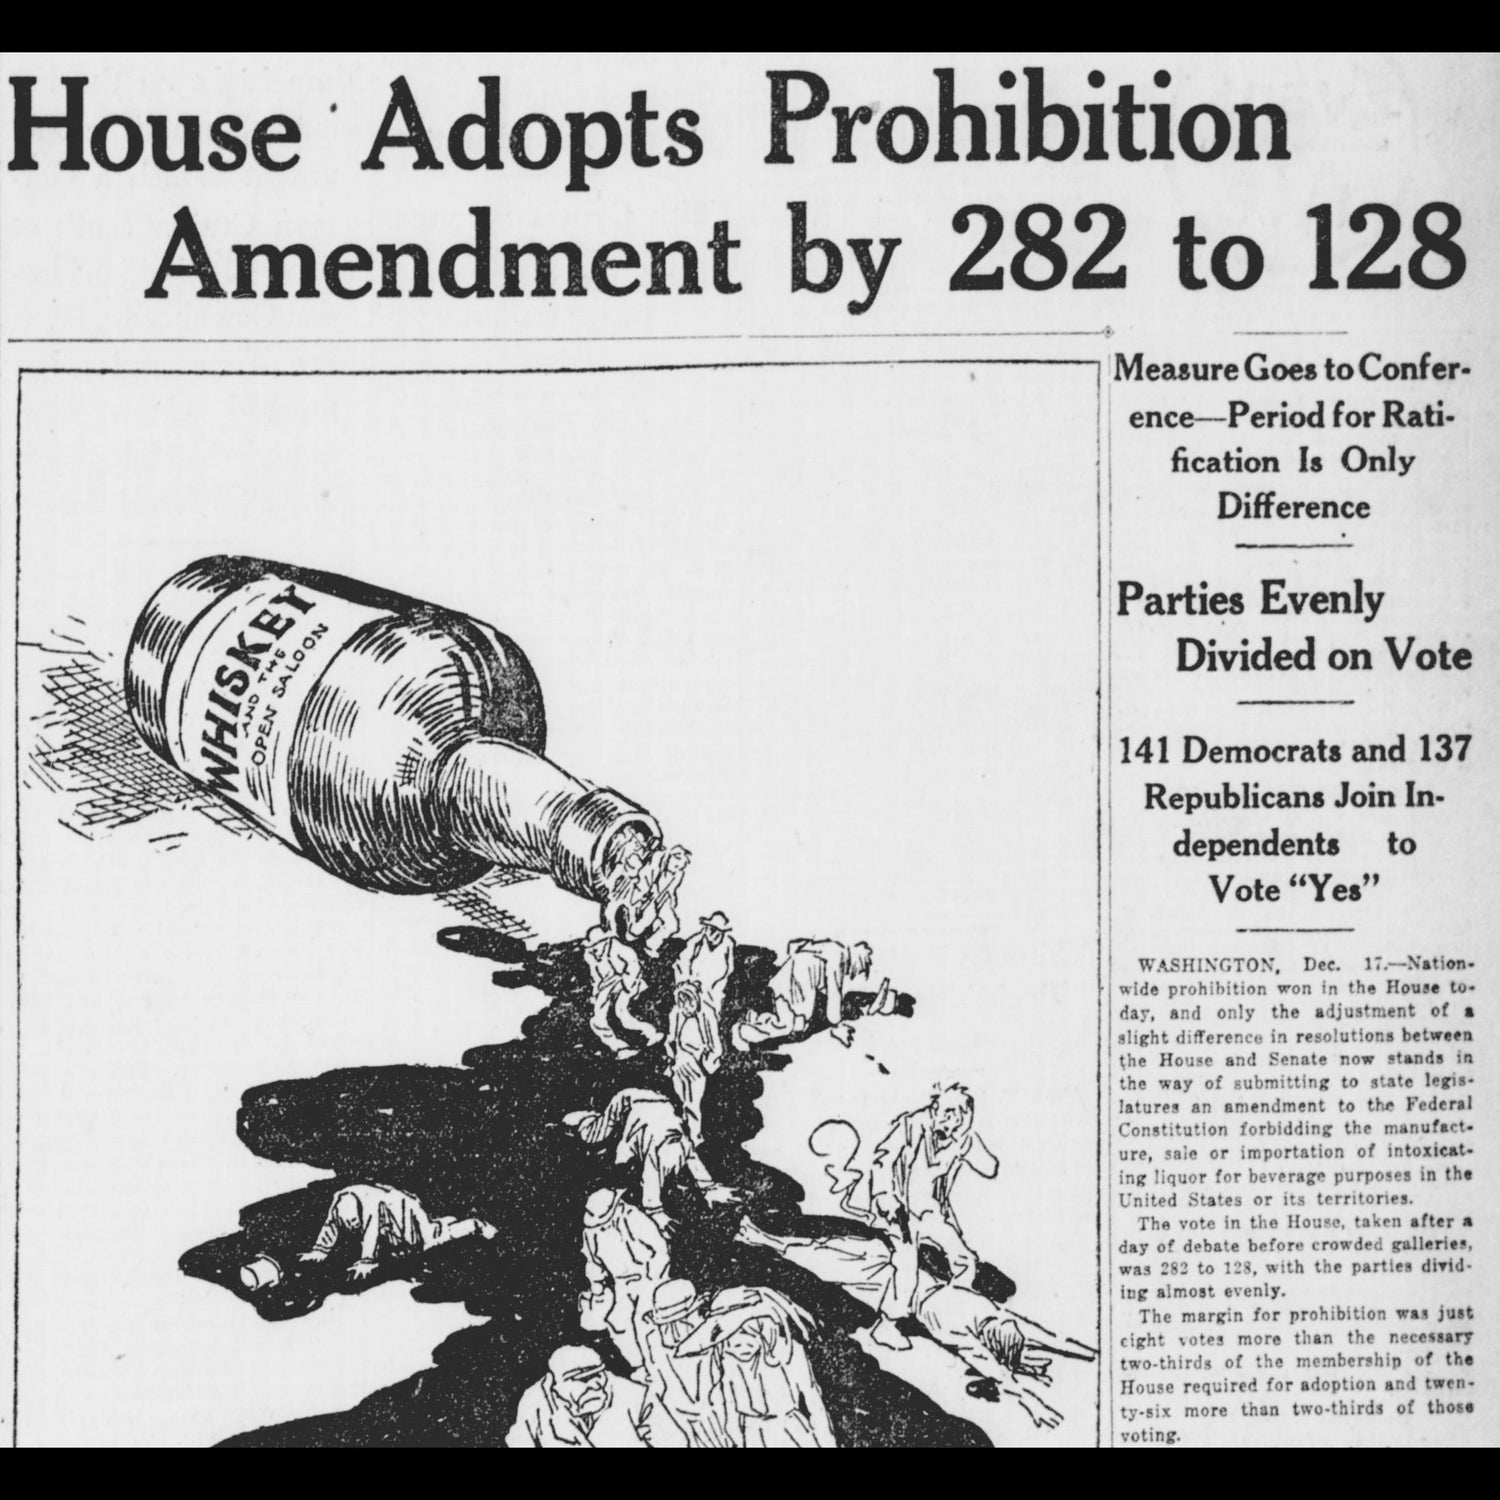 Prohibition dried out America from 1920 to 1933.